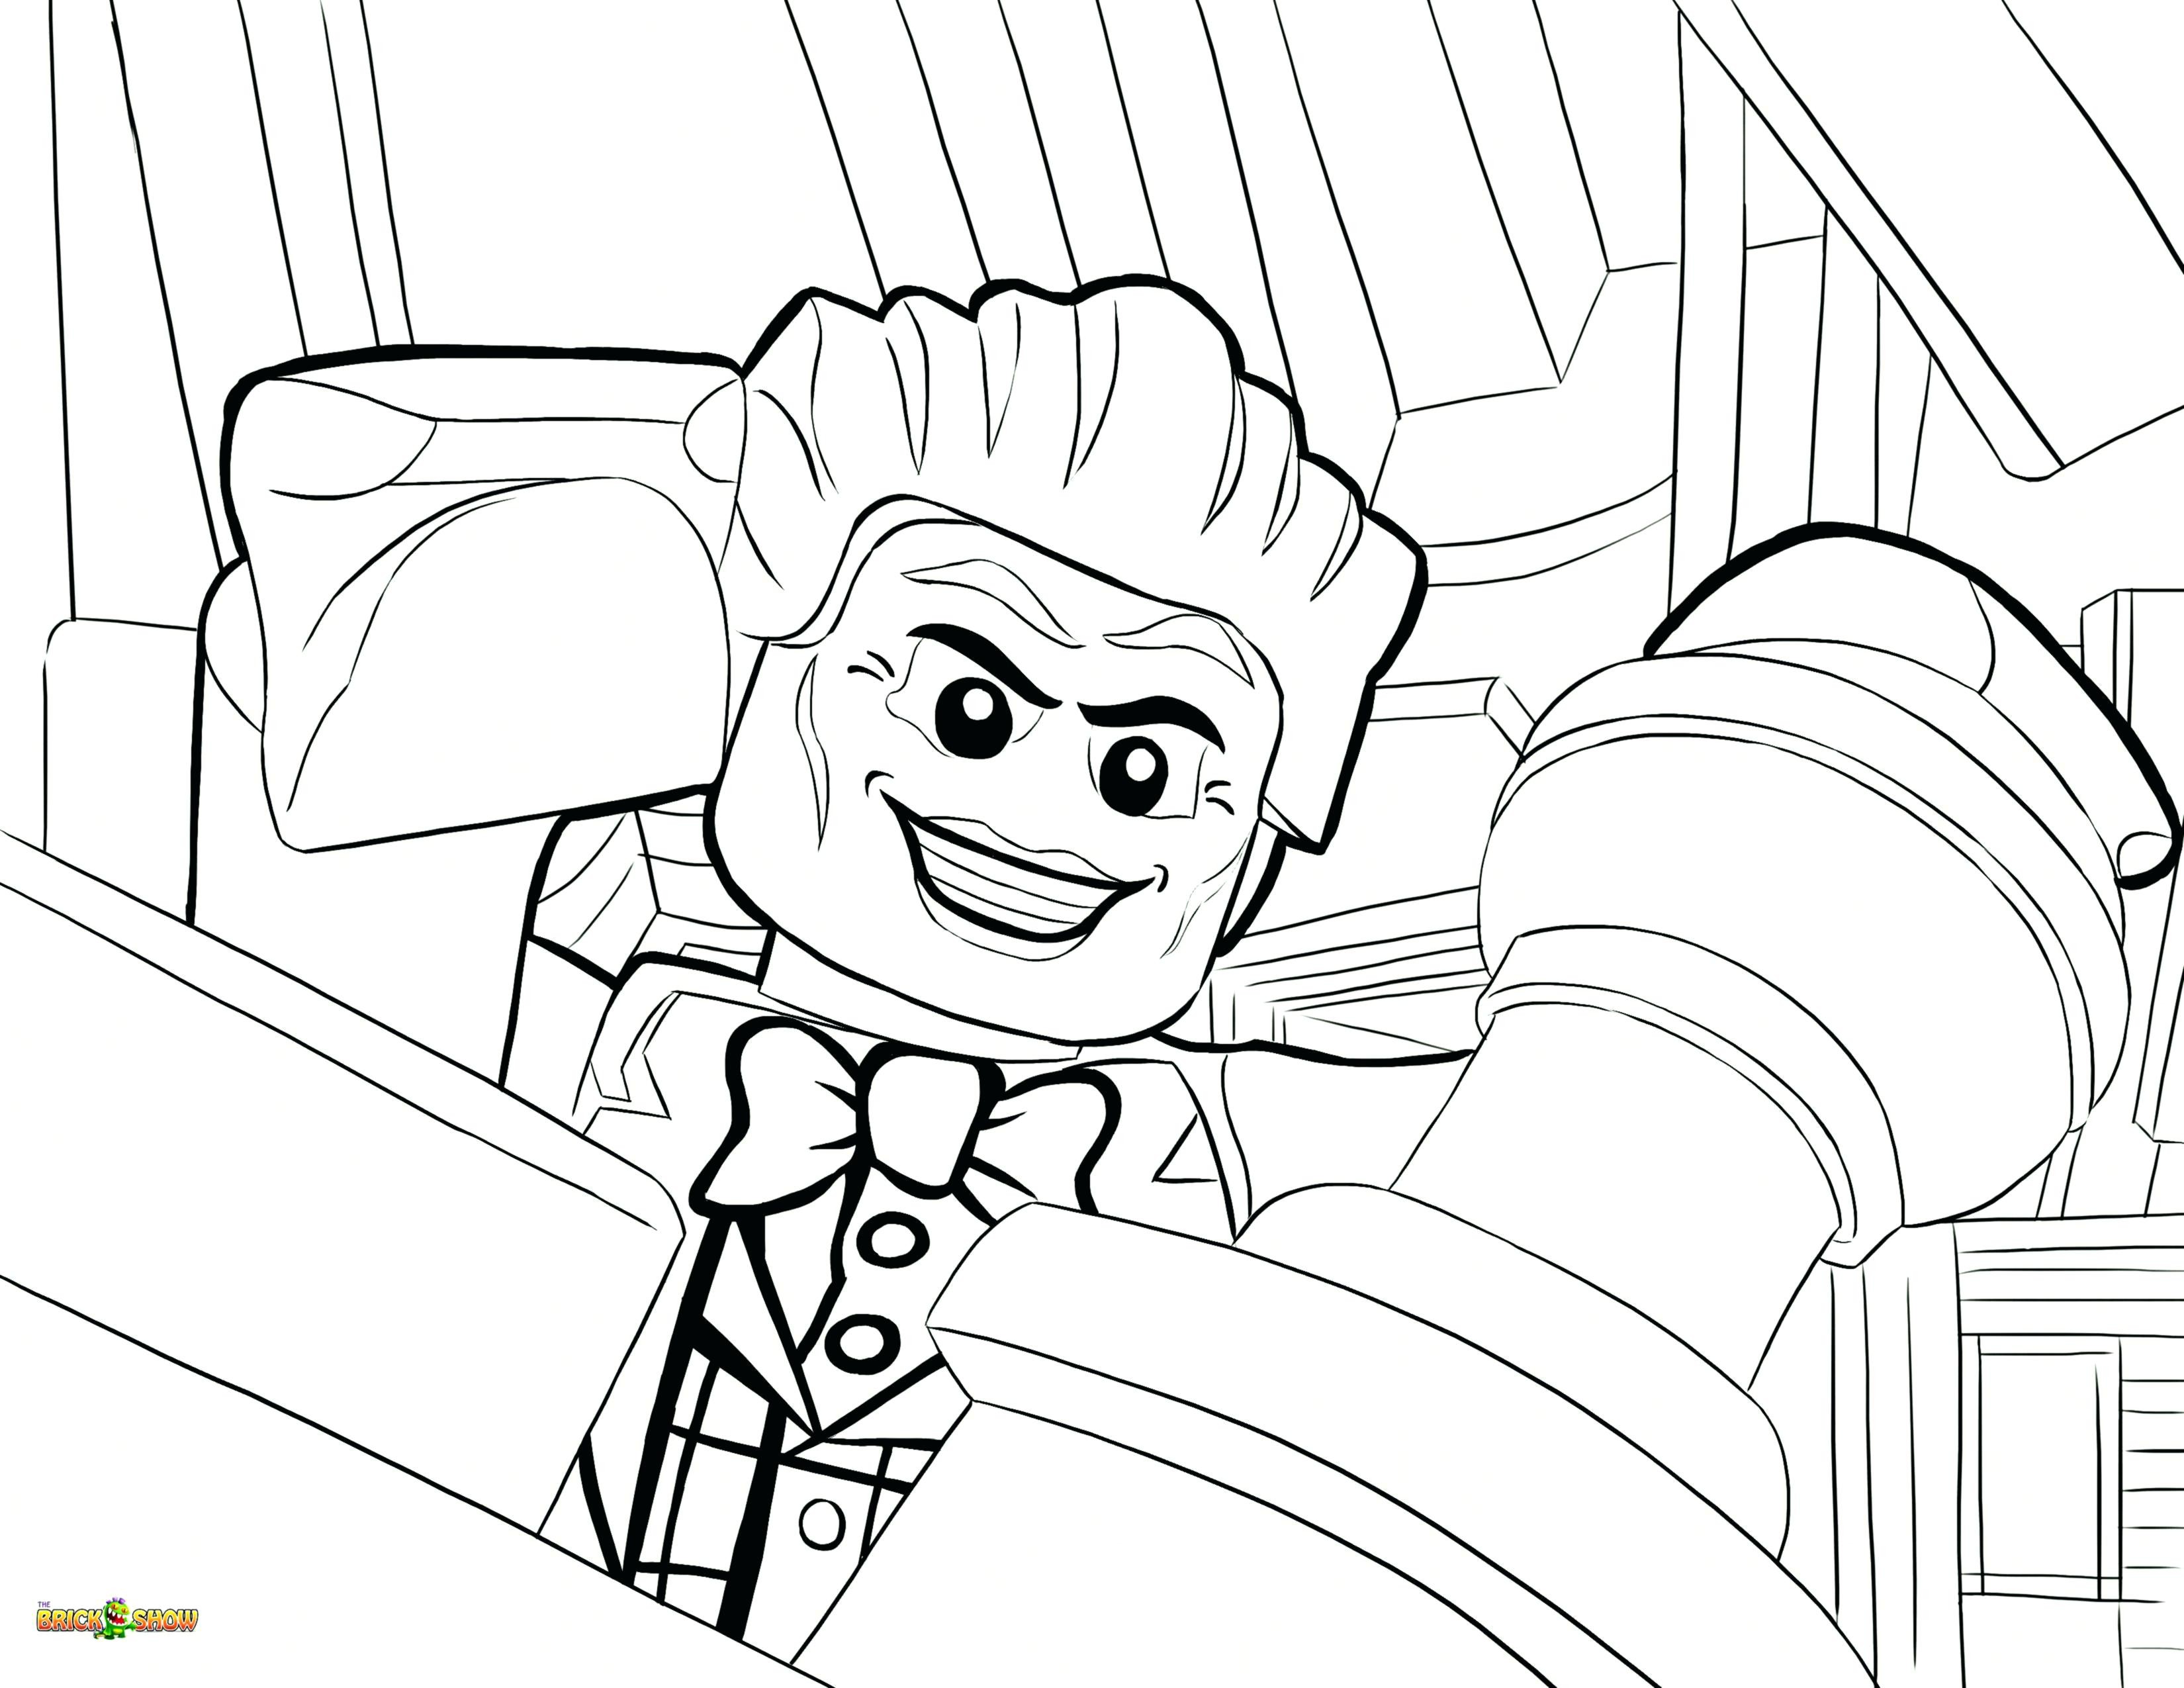 Lego Avengers Coloring Pages at GetColorings.com   Free ...